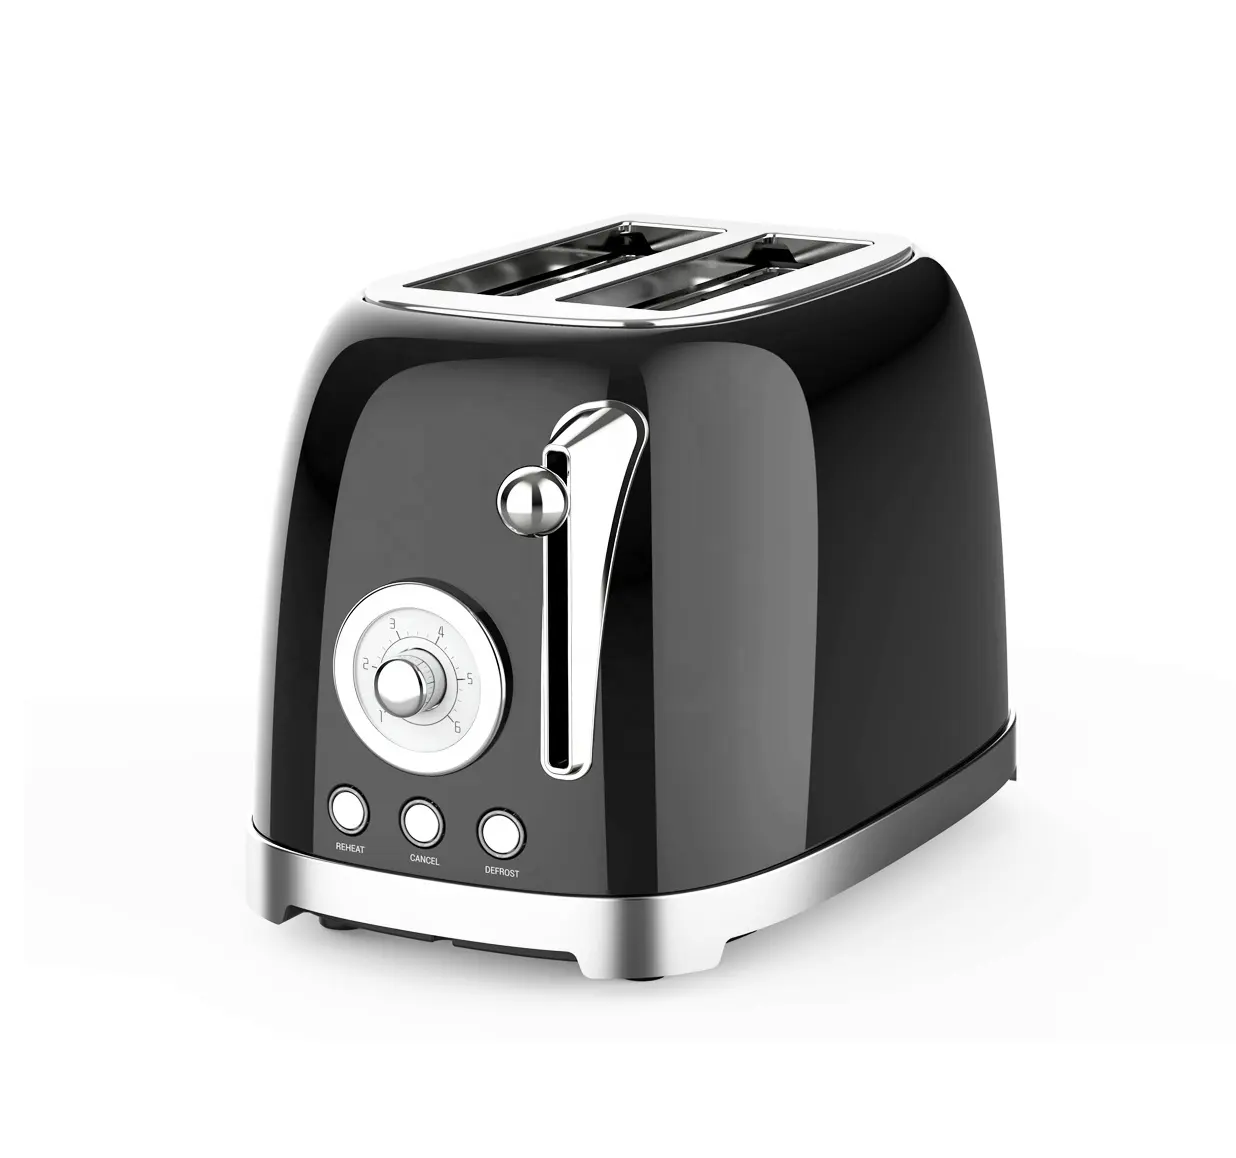 High quality hotel cafe home stainless steel automatic fast kitchen appliances bread maker toast maker 2 slice metal toaster